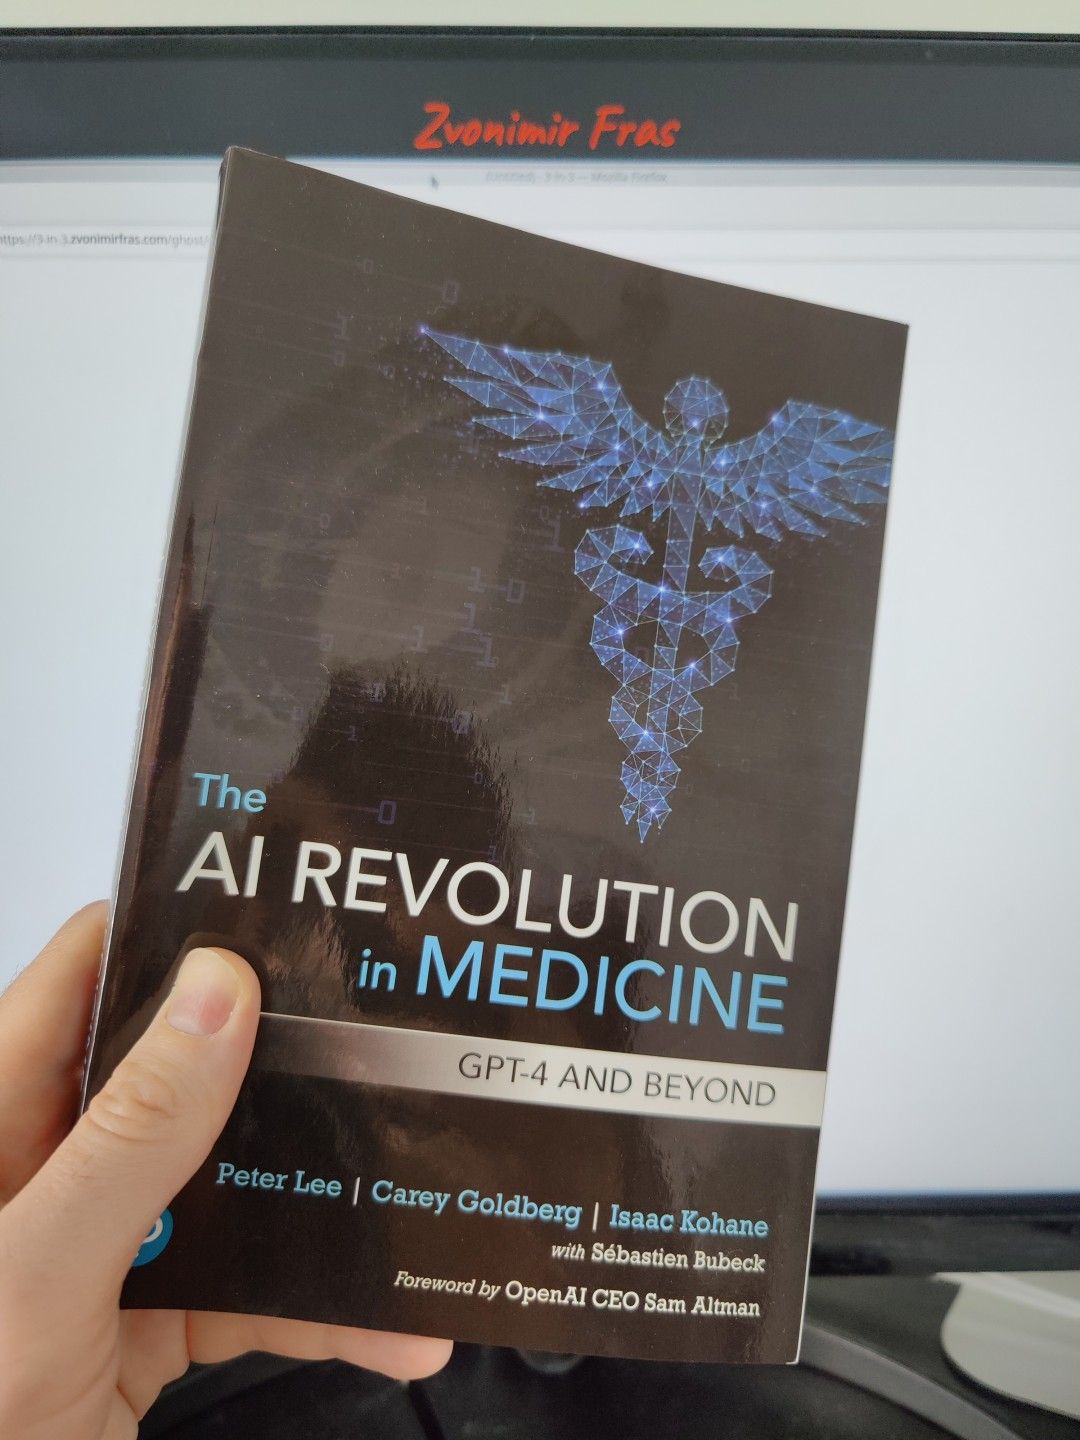 The AI revolution in medicine - GPT-4 and beyond - by Peter Lee, Carey Goldberg and Isaac Kohane